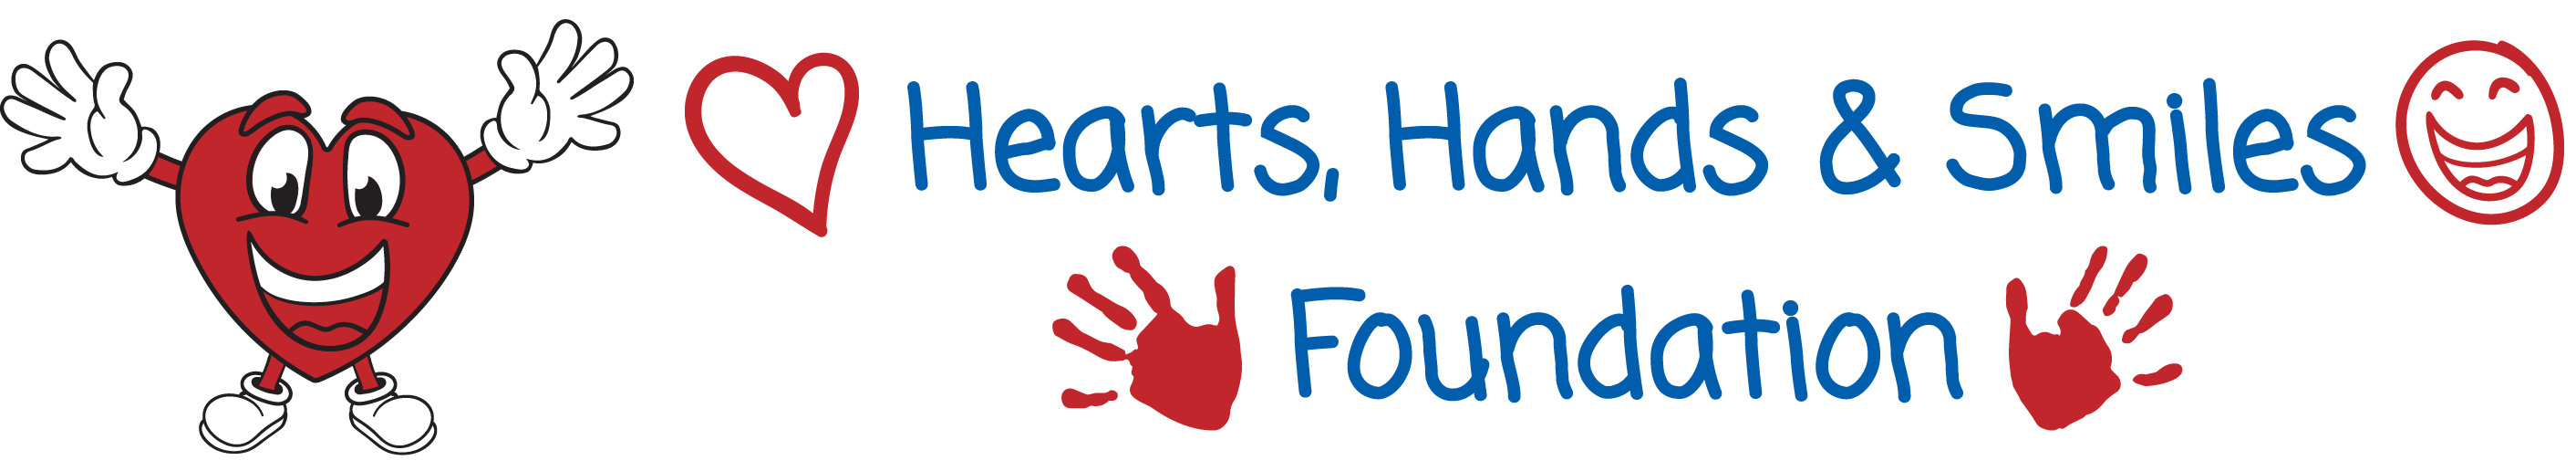 Hearts, Hands & Smiles Foundation